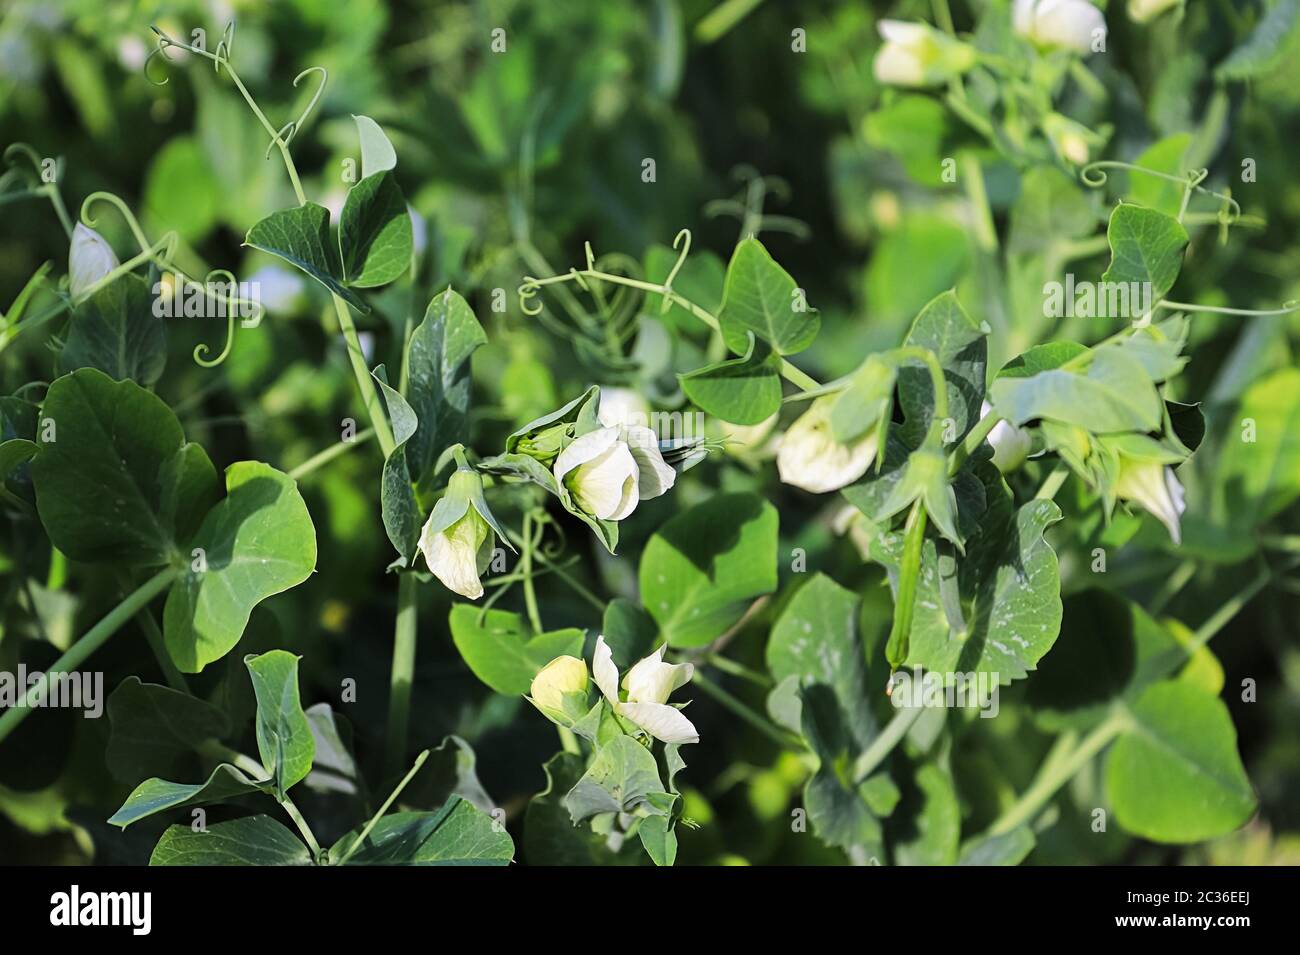 Various pea flowers growing in the spring garden. Stock Photo